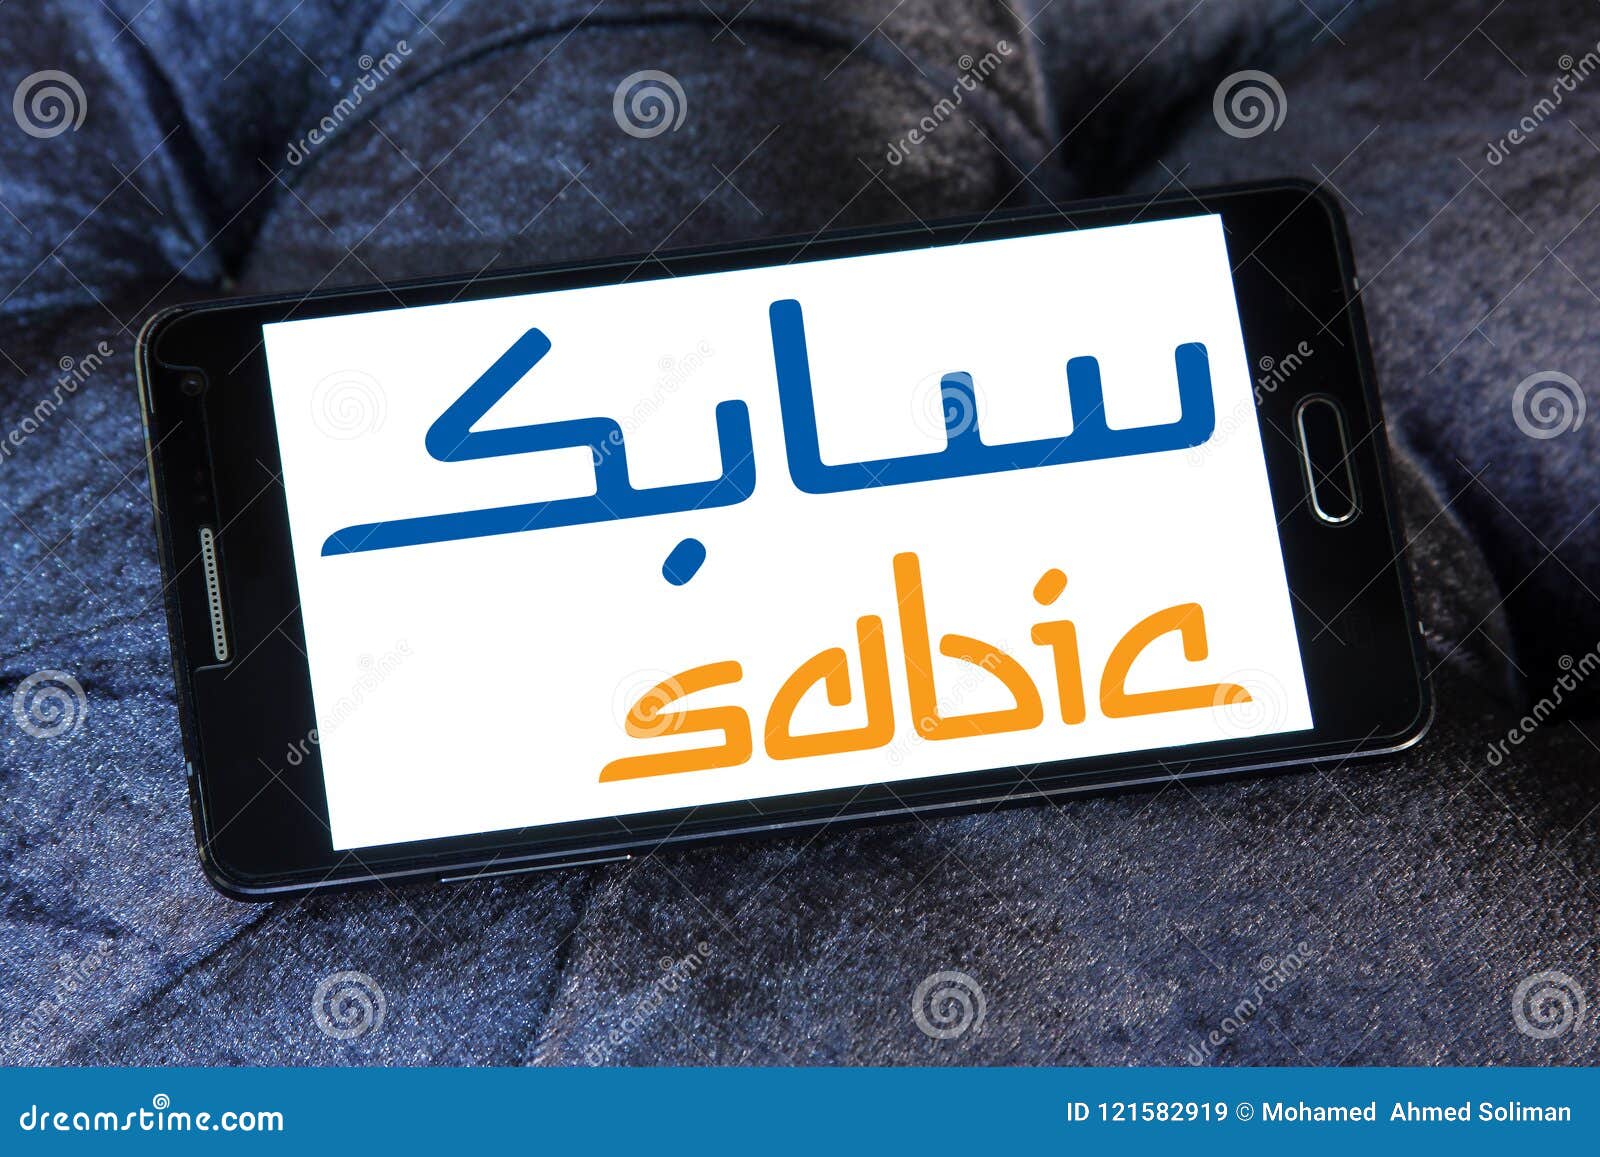 SABIC Chemicals Company Logo Editorial Stock Image - Image ...